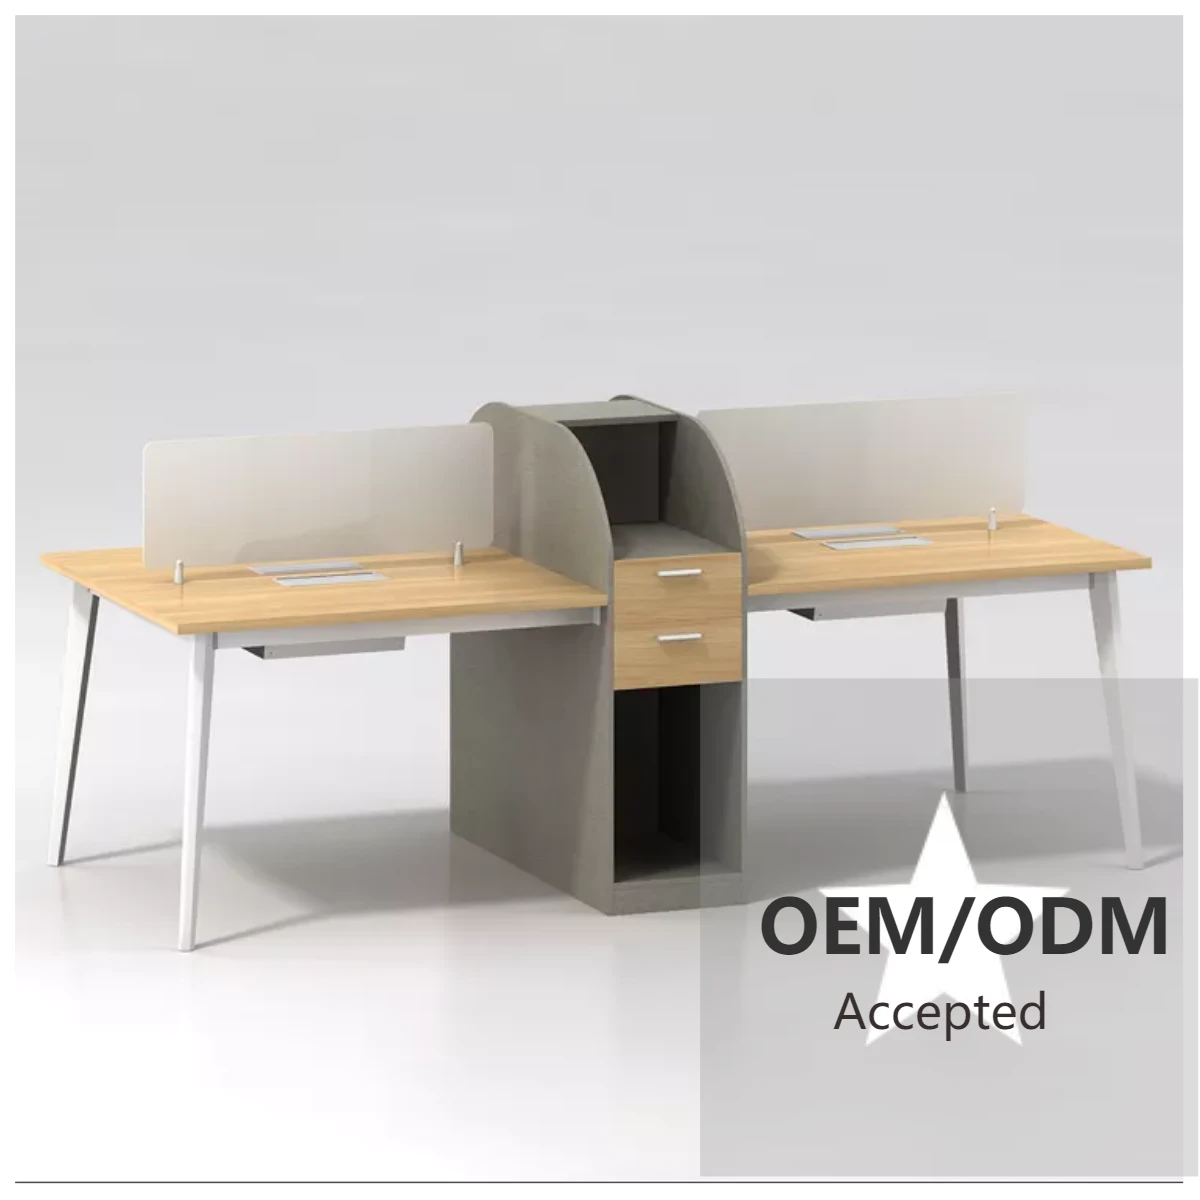 Modern Office Executive Manager Workstation Made in China Office Furniture Office Desks Working Desk Metal E1 MFC Iron 3-5 Years